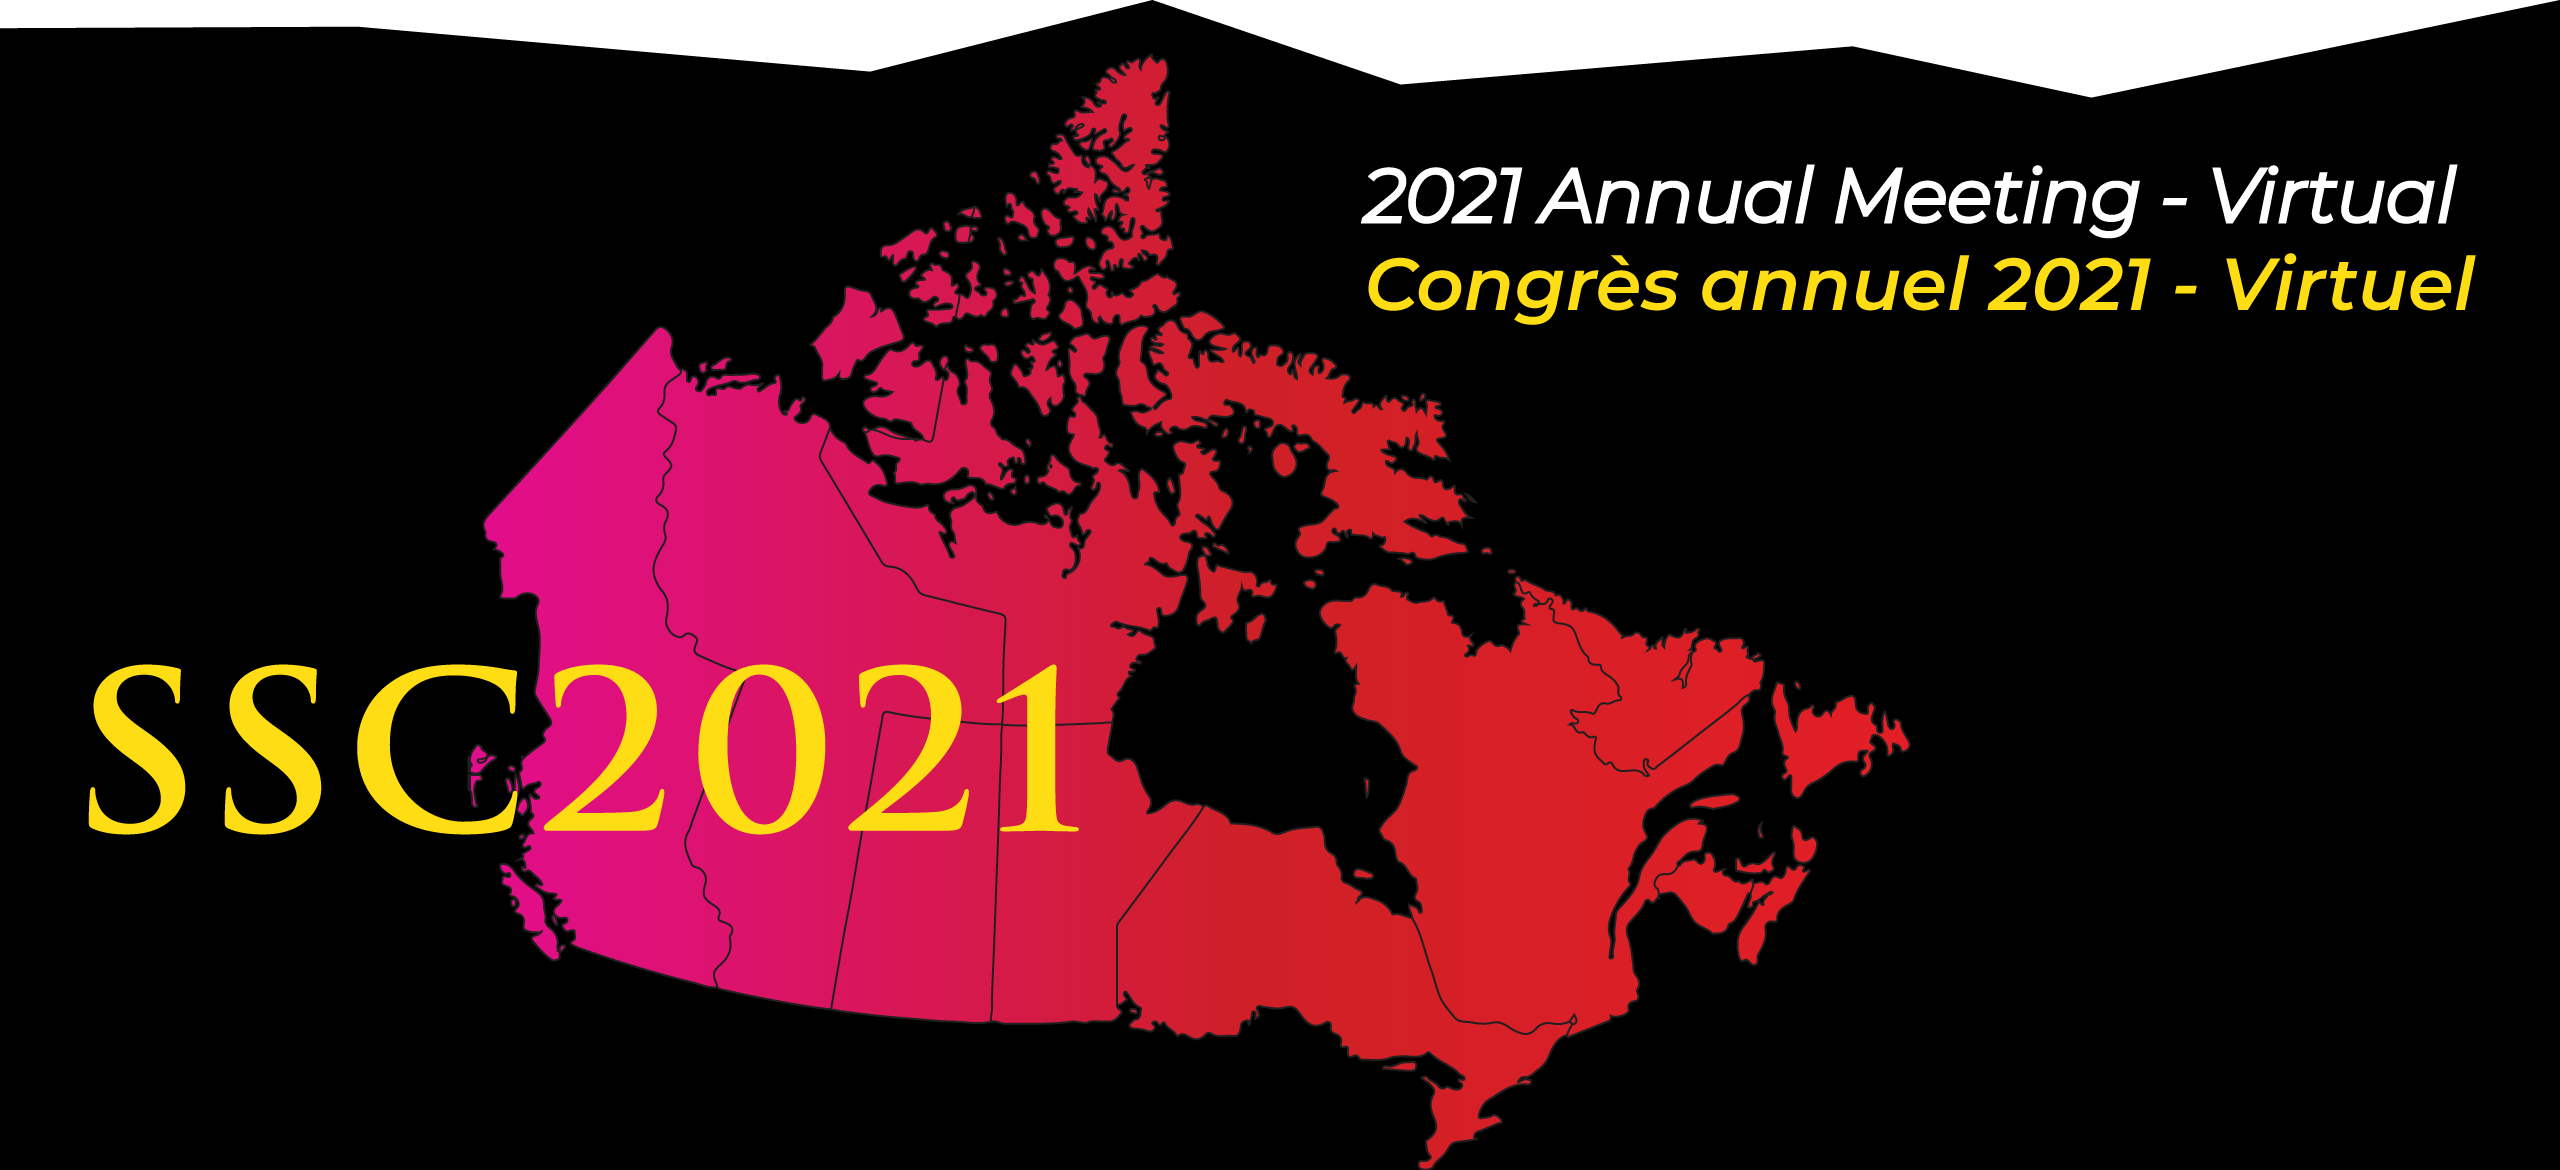 SSC 2021 Conference banner. Image description: Map of Canada with pink to red gradient from west to east on a black background. Test in top right says 2021 Annual Meeting - Virtual in English and French. All on black background.